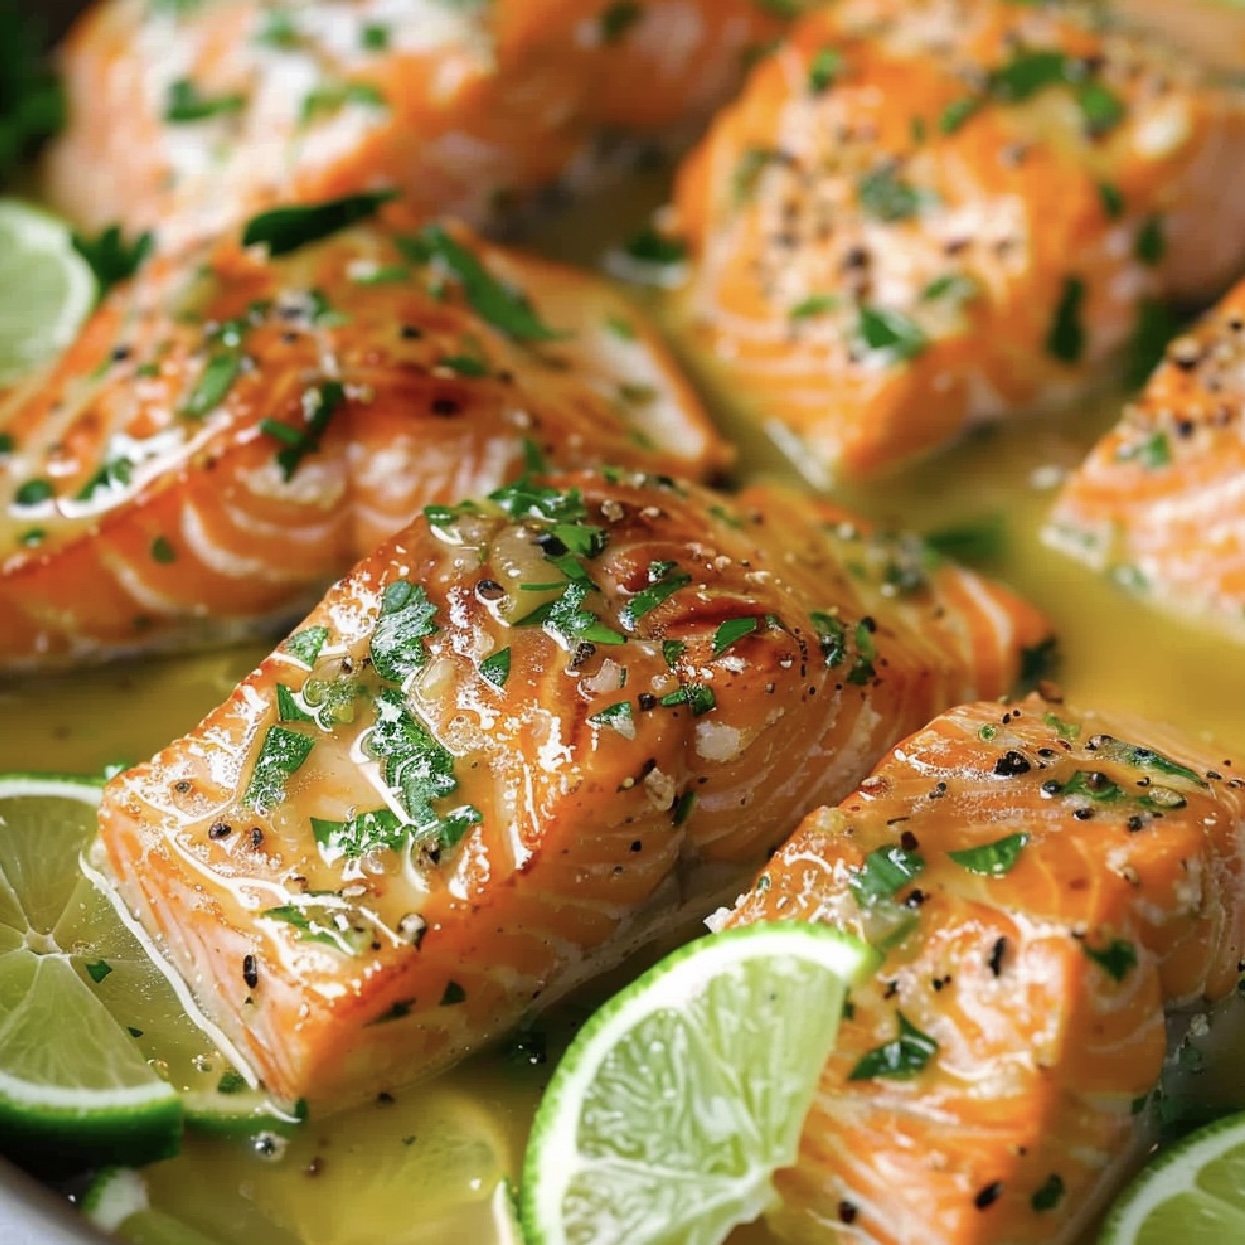 Dive into the flavors of this heavenly baked salmon, enriched with honey, lime, and garlic for a perfect meal.